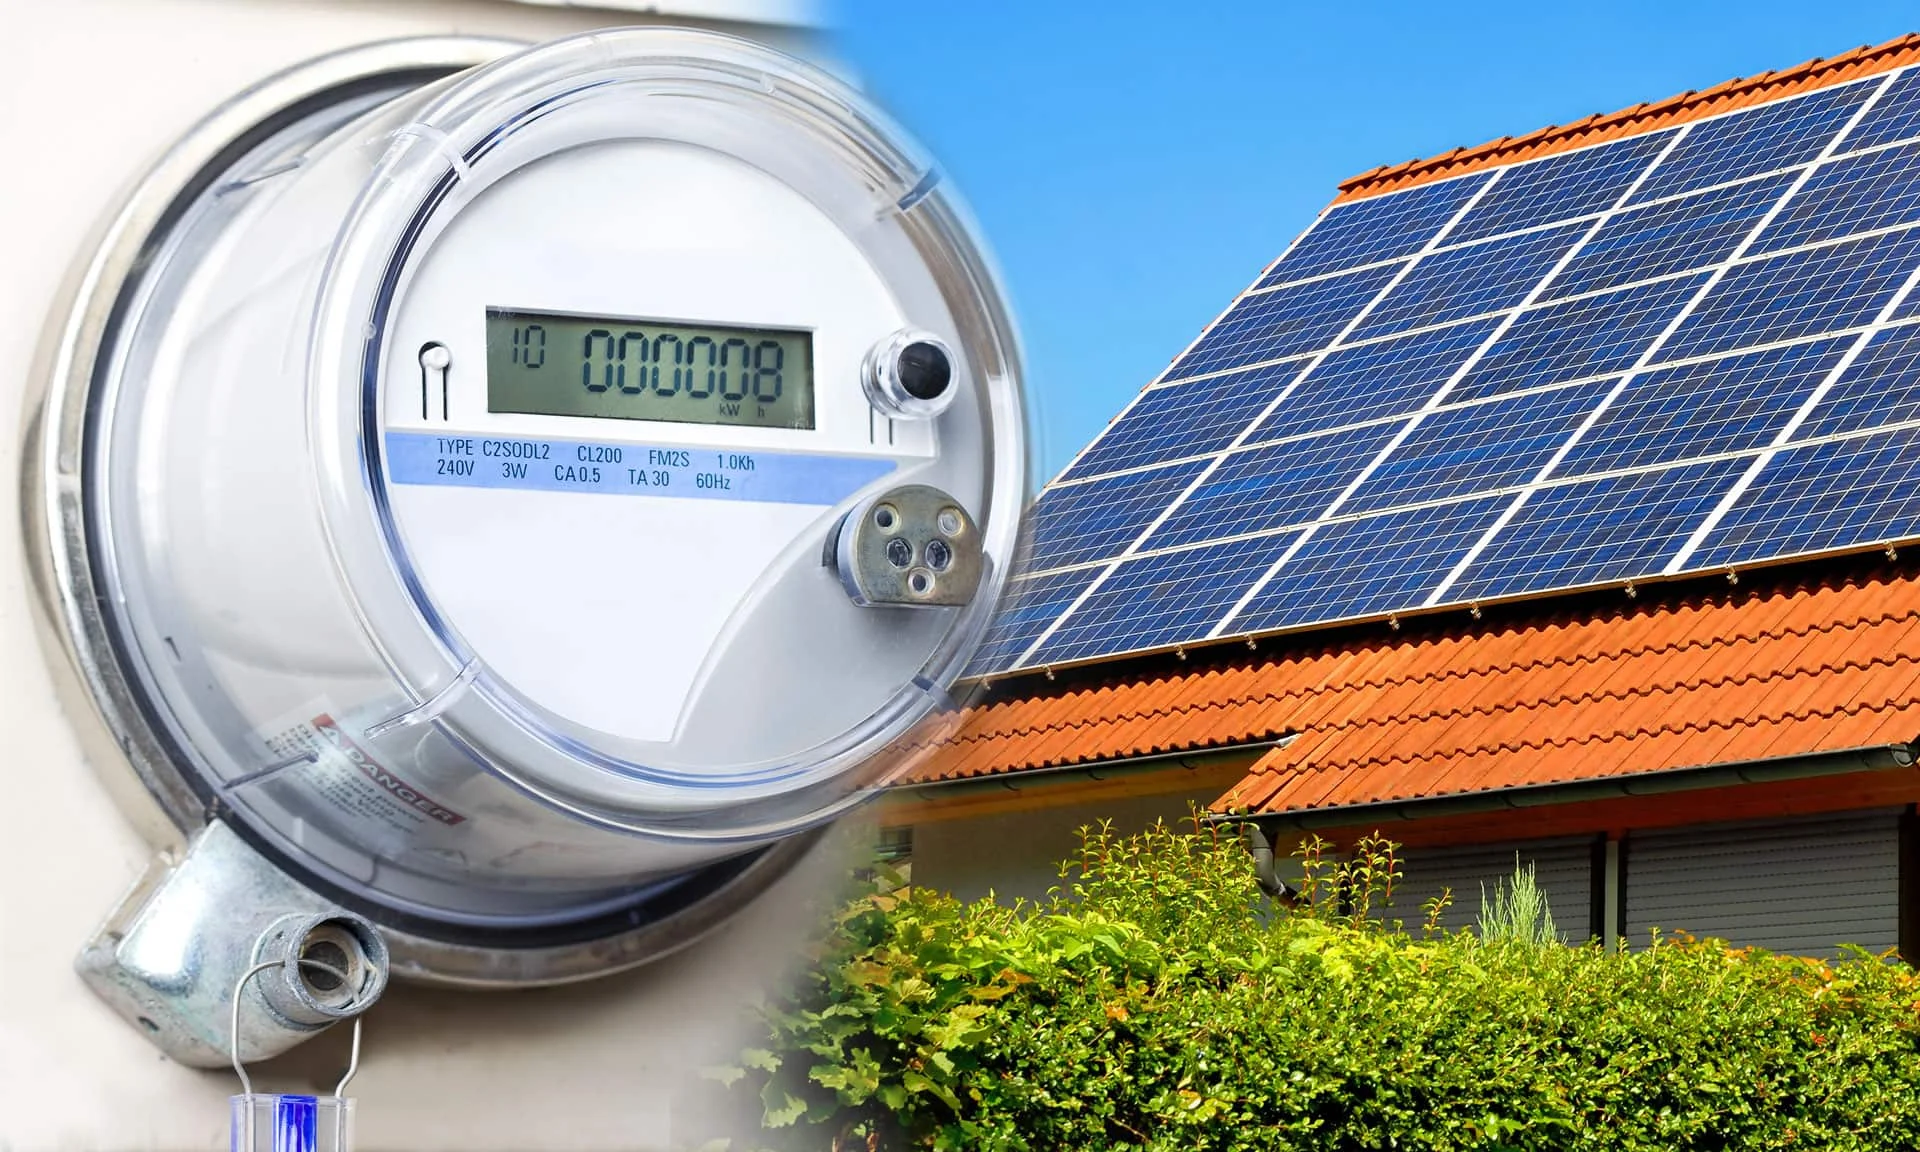 understanding-the-key-features-and-functions-of-a-solar-power-meter/